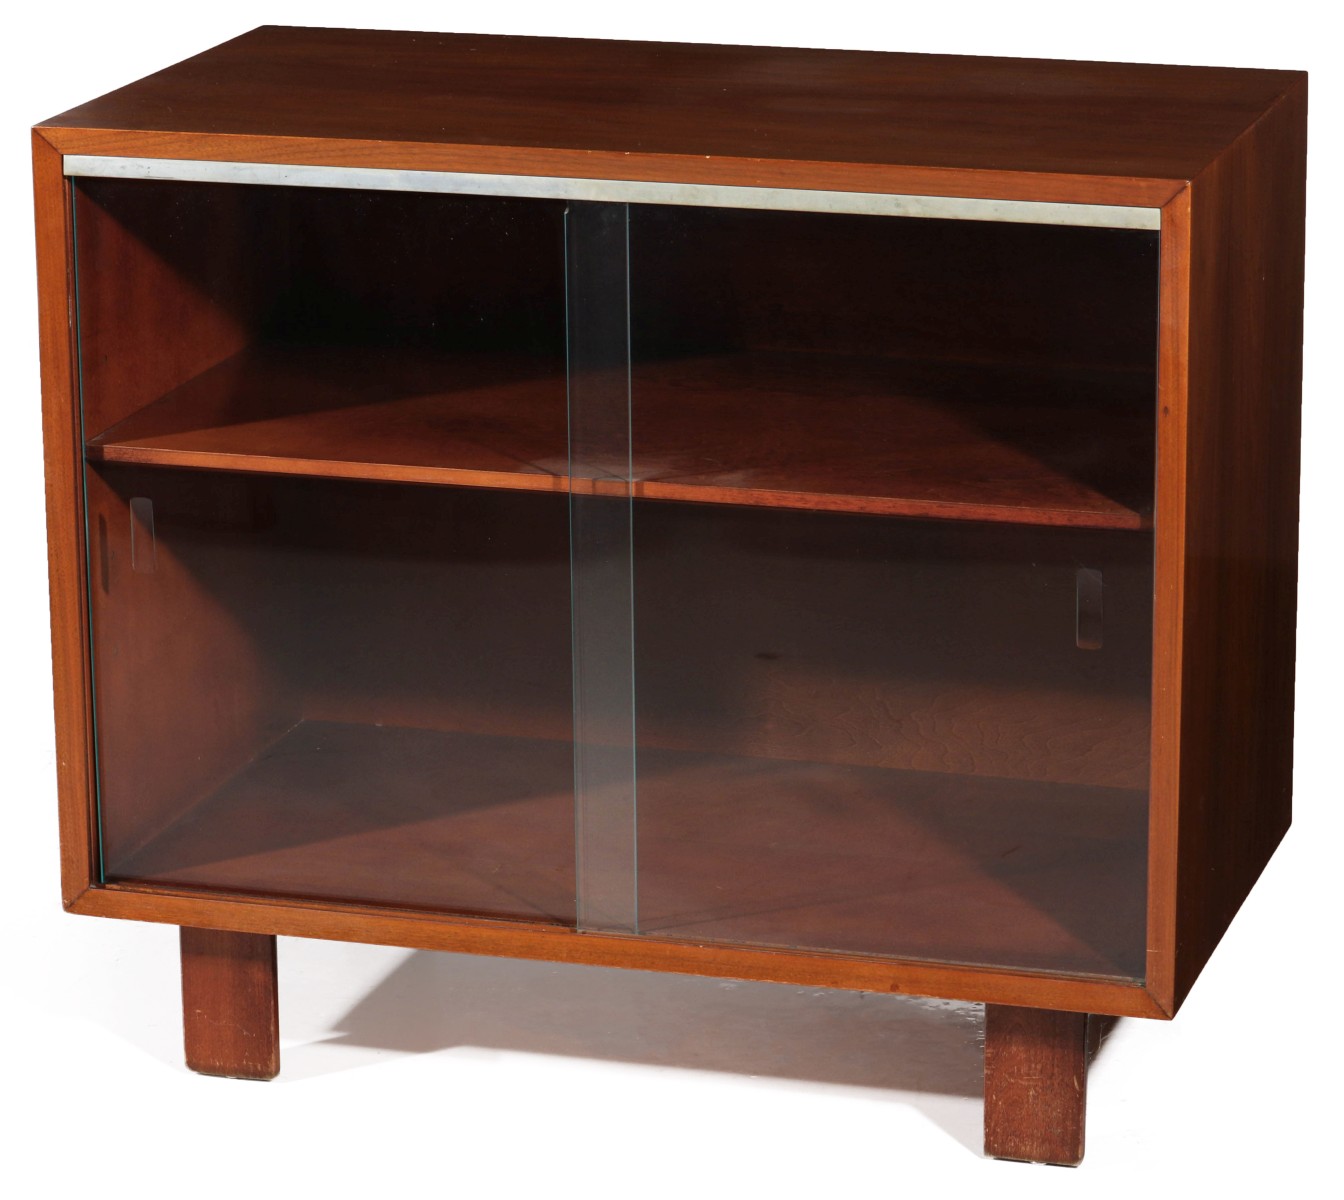 A GEORGE NELSON SIDE CABINET FOR HERMAN MILLER